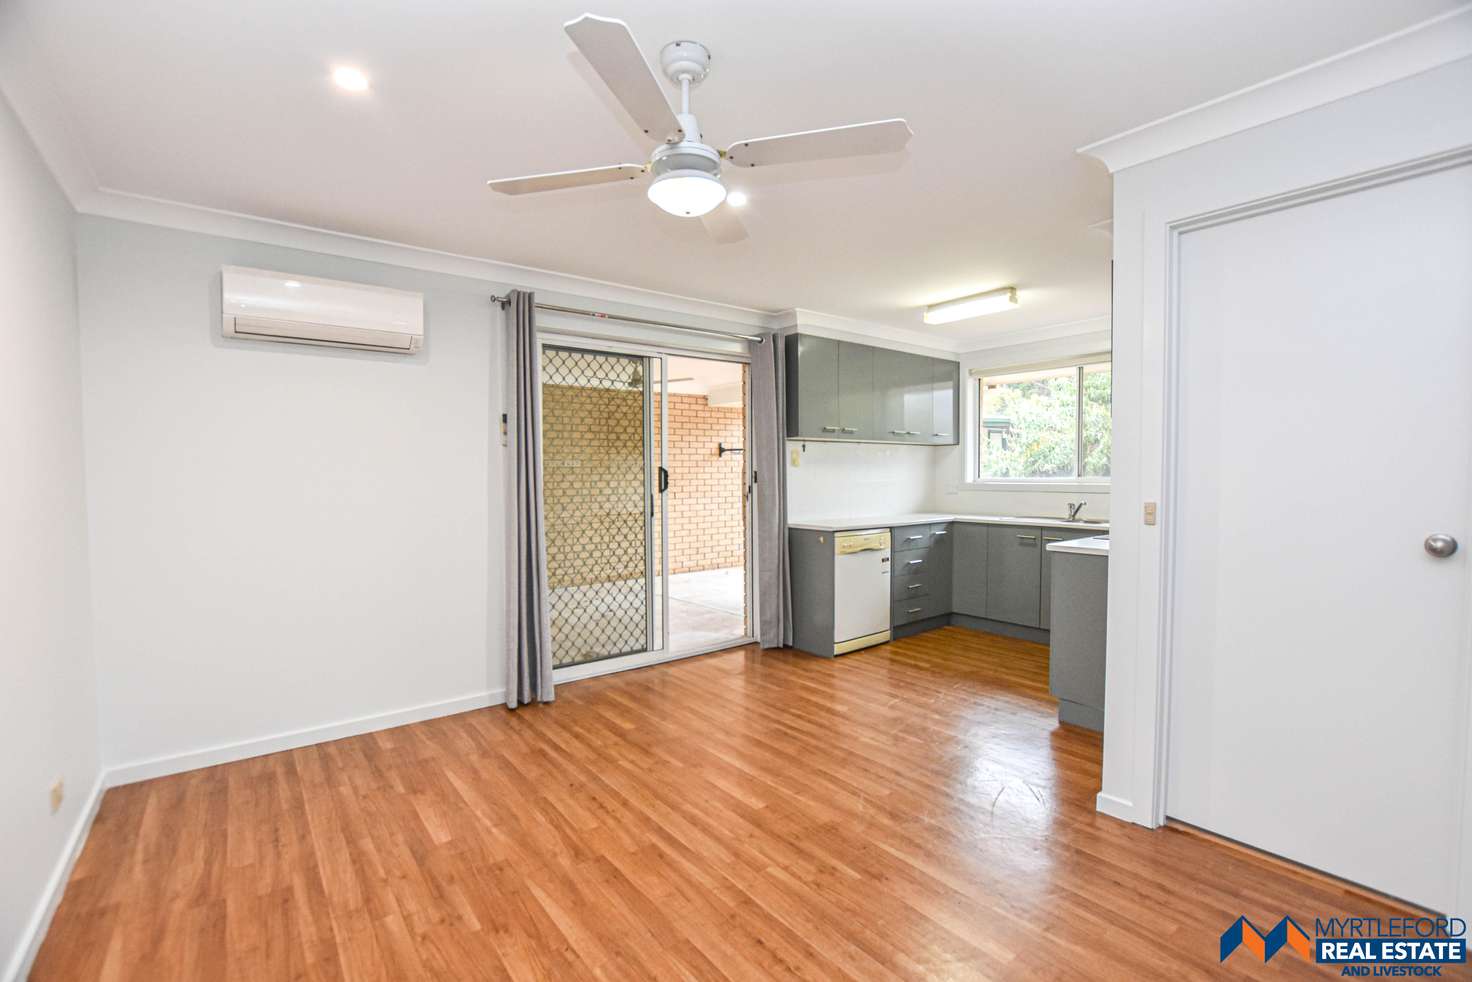 Main view of Homely unit listing, 5/1 Elgin Street, Myrtleford VIC 3737